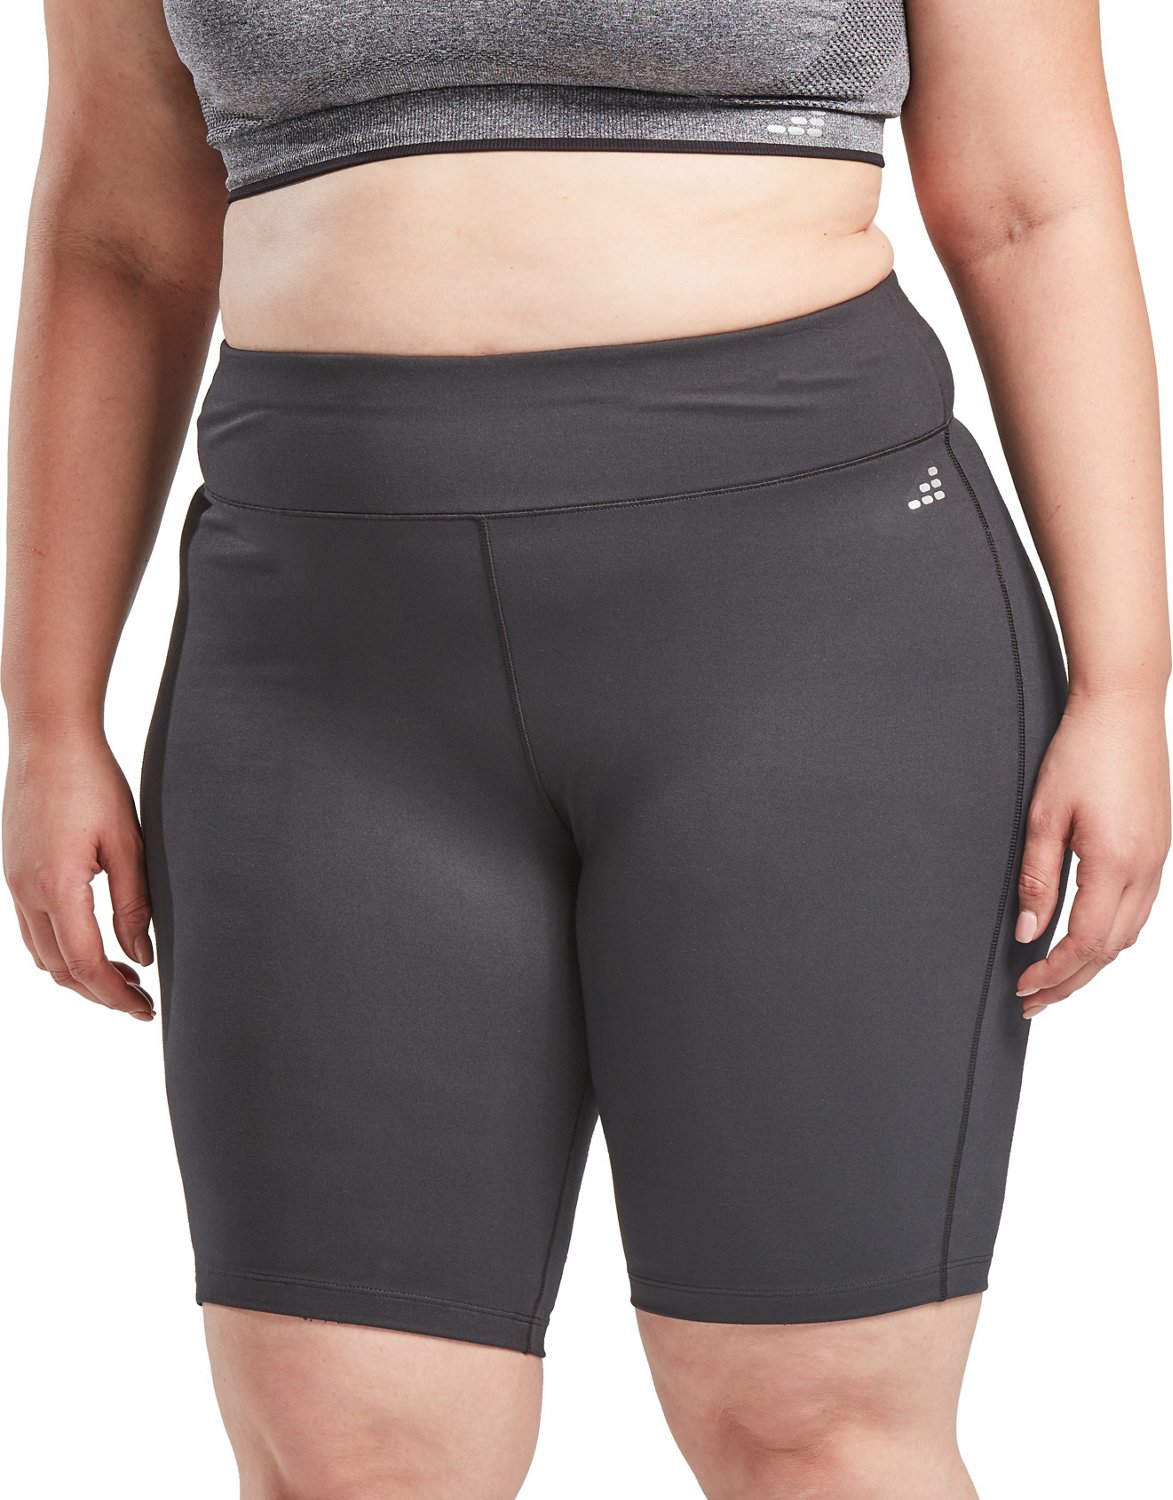 Best Cycling Shorts For Plus Sized Women